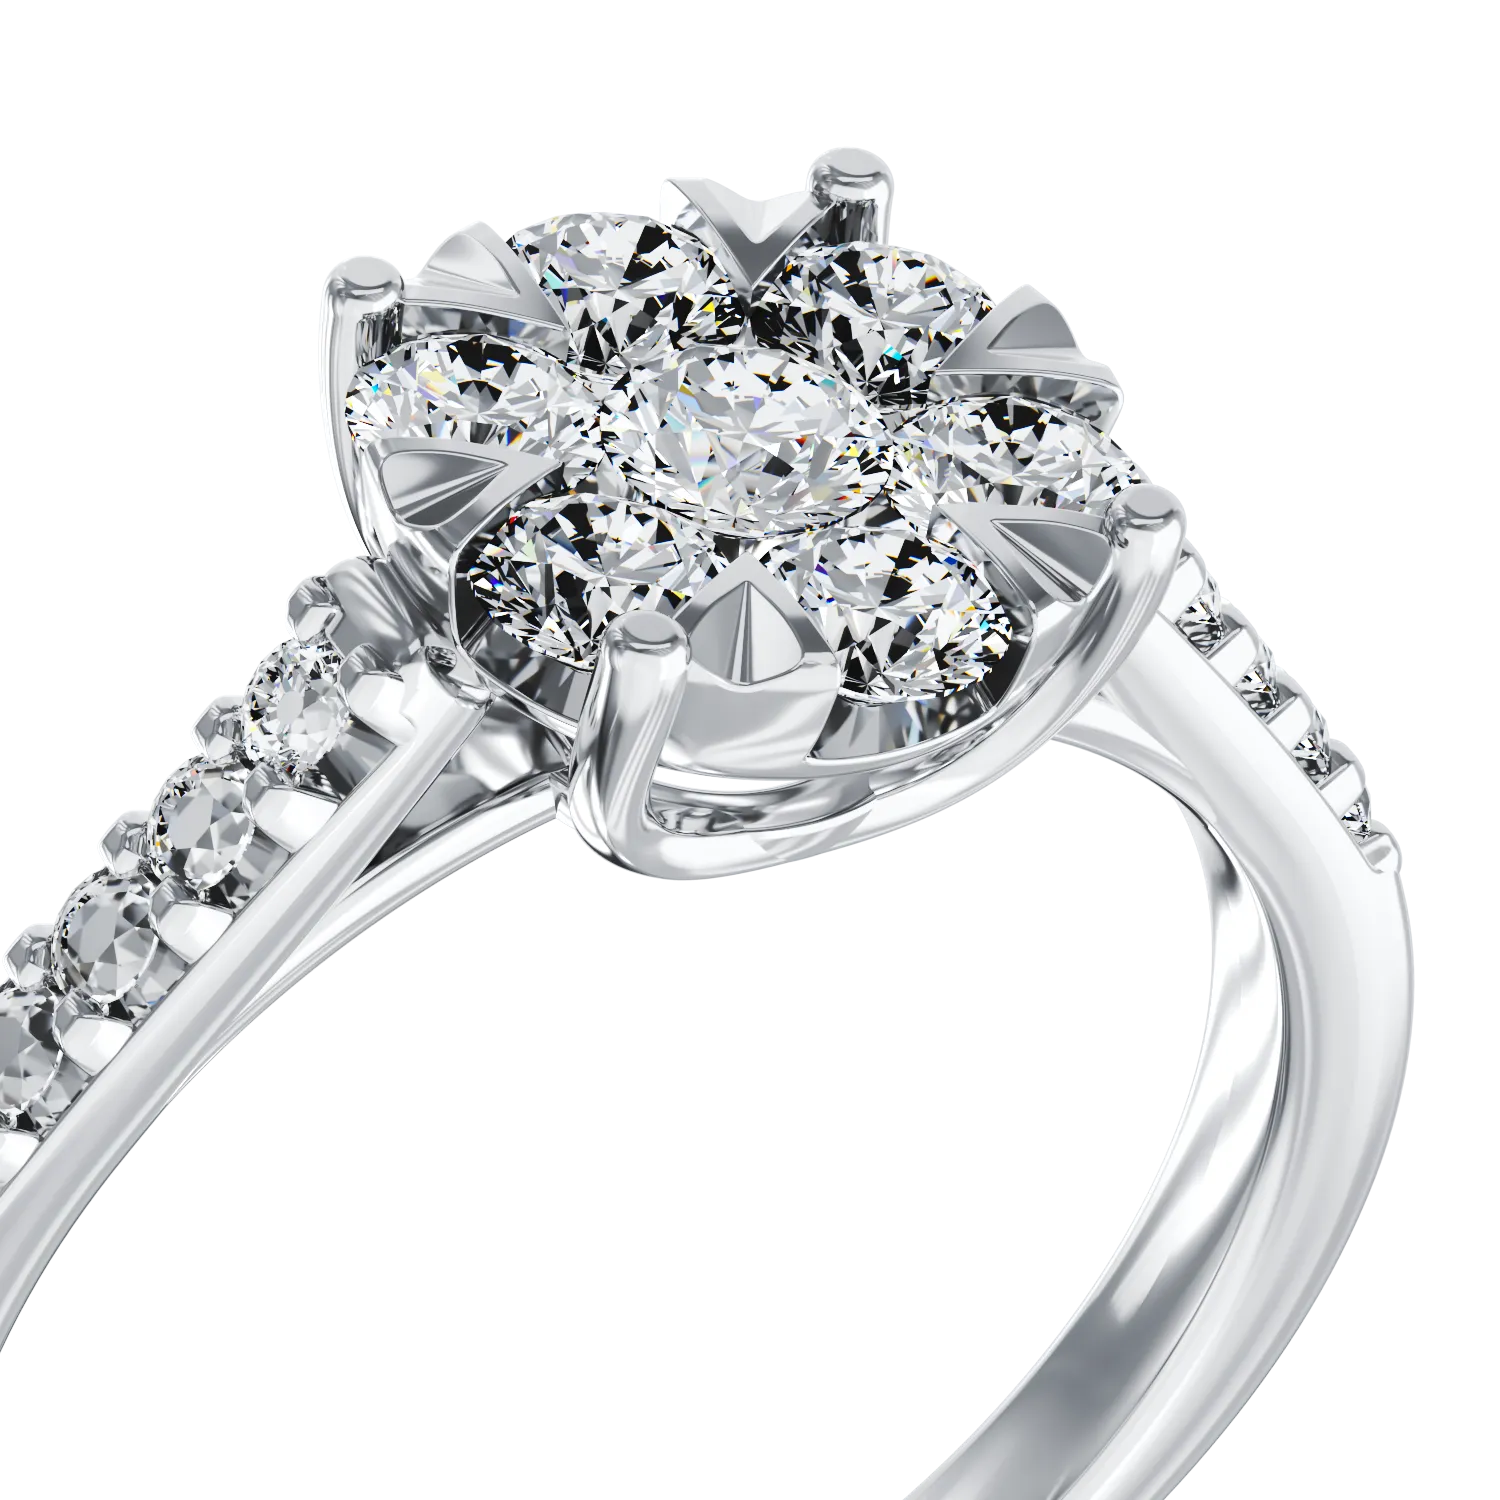 White gold engagement ring with 0.5ct diamonds